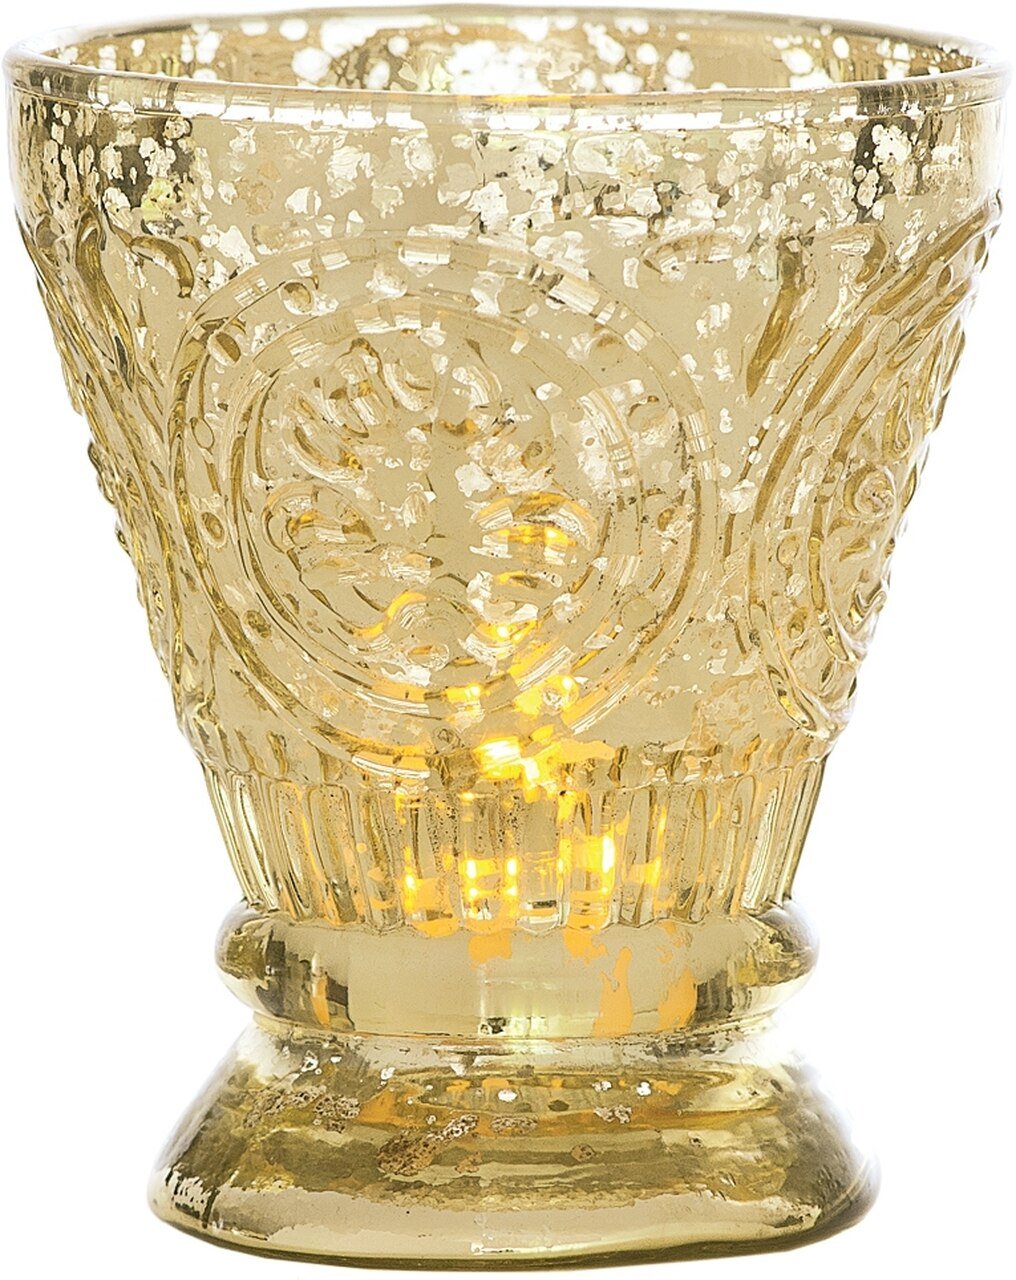 Vintage Mercury Glass Candle Holder (4-Inch, Rosemary Design, Gold) - For Use with Tea Lights - For Home Decor, Parties, and Wedding Decorations - AsianImportStore.com - B2B Wholesale Lighting and Decor